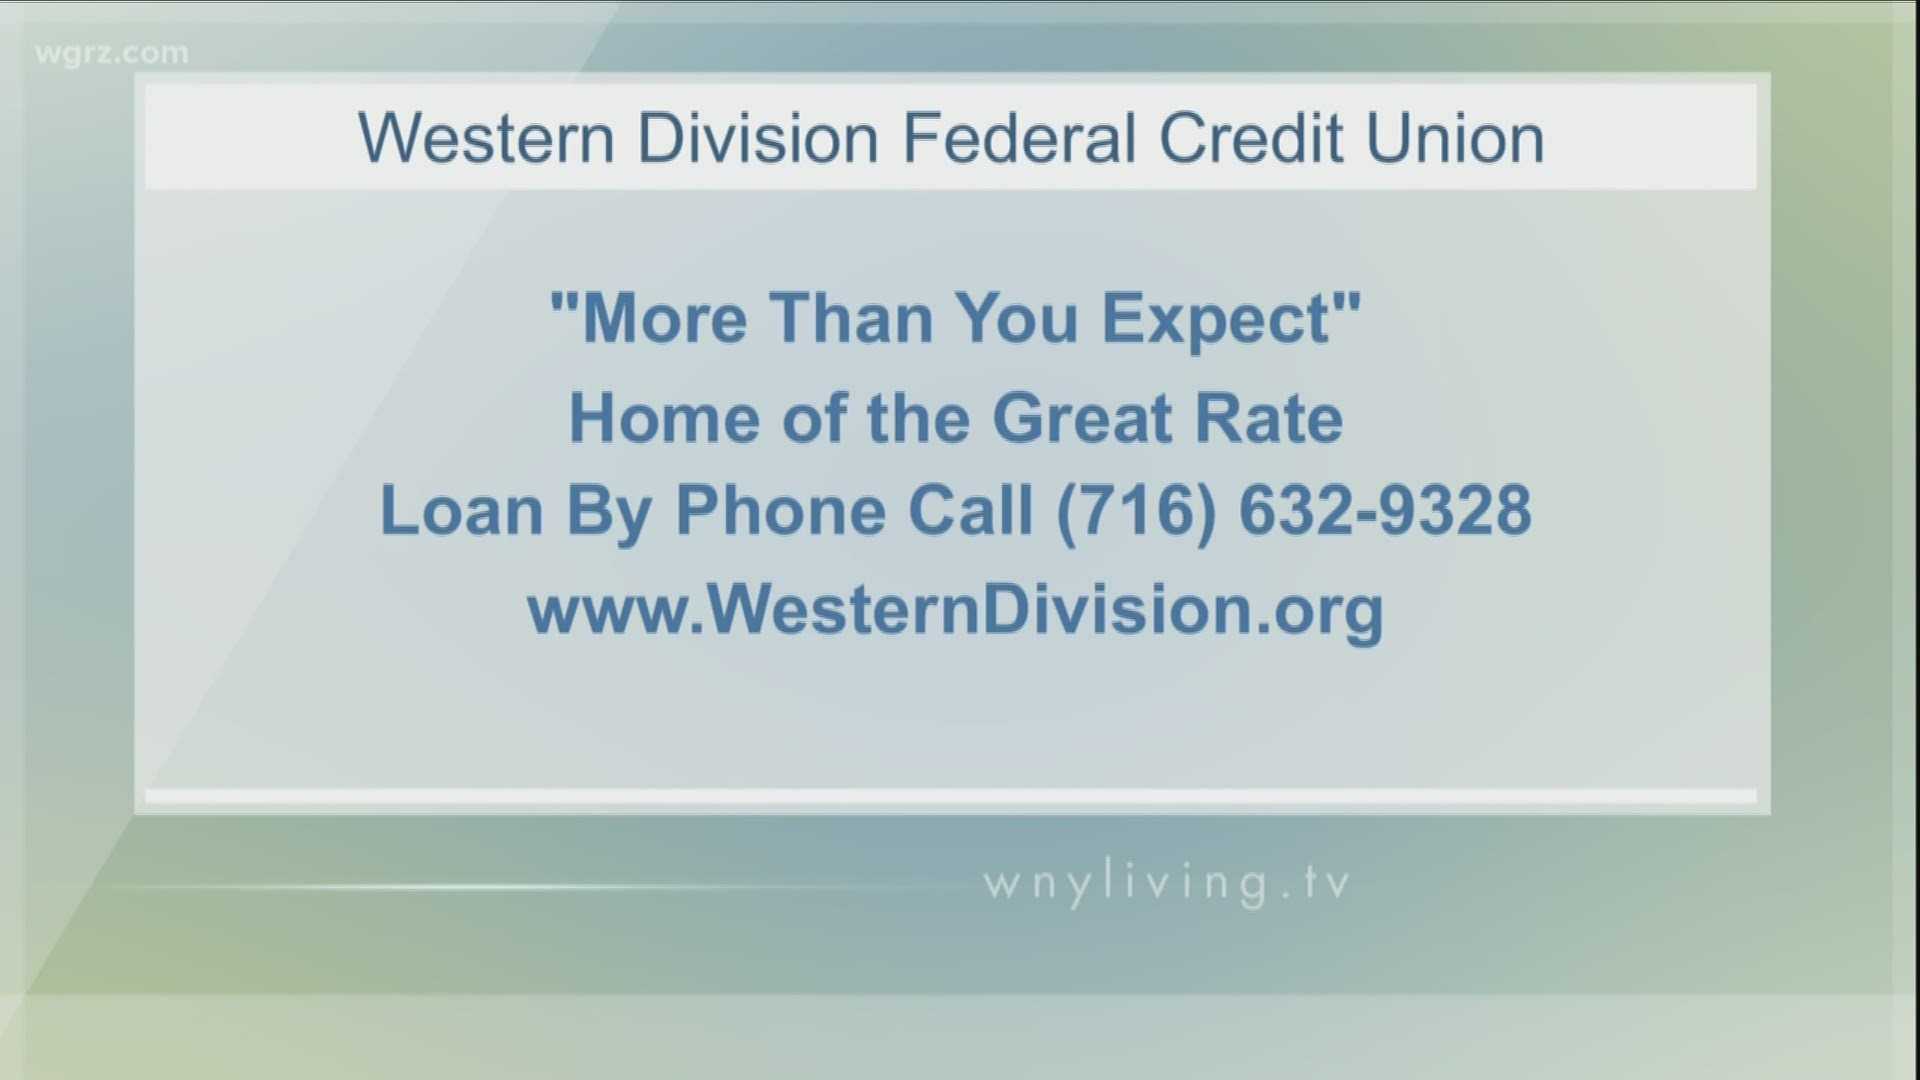 March 7 - WECK Western Division Federal Credit (THIS VIDEO IS SPONSORED BY WECK WESTERN DIVISION FREDERAL CREDIT UNION)